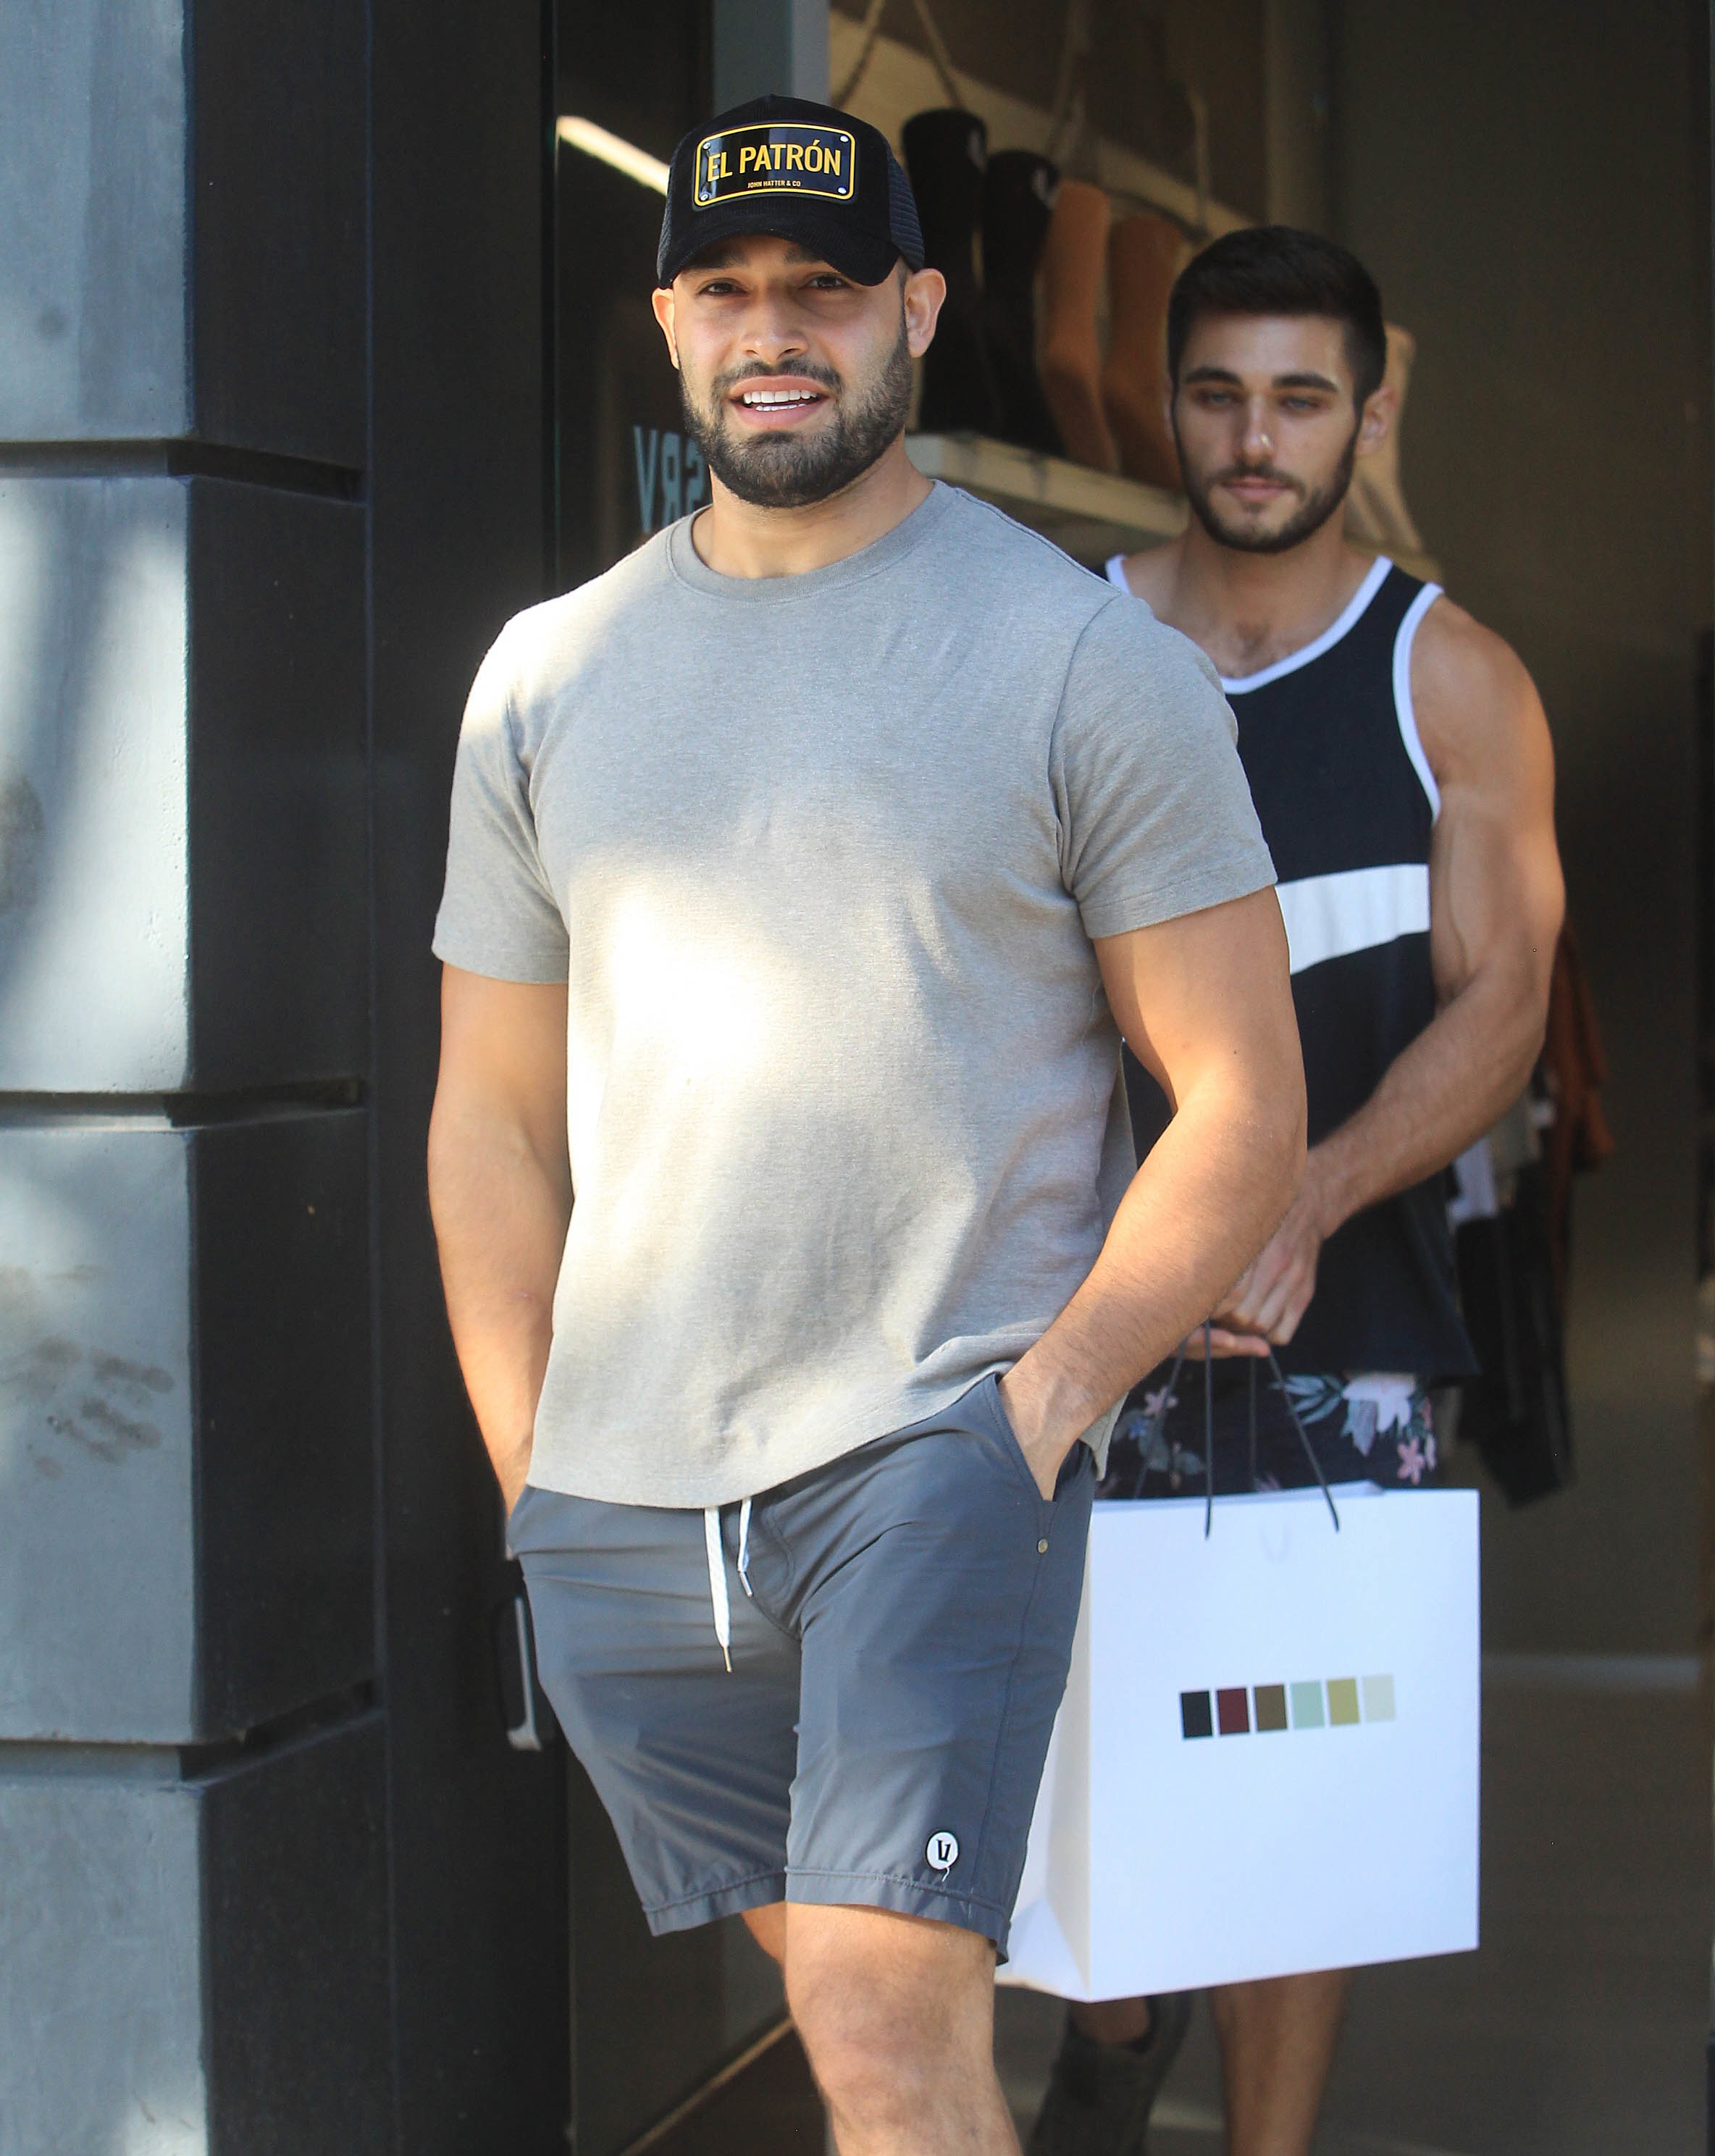 Close-up of Sam in shorts, T-shirt, and an El Patrón cap leaving a store